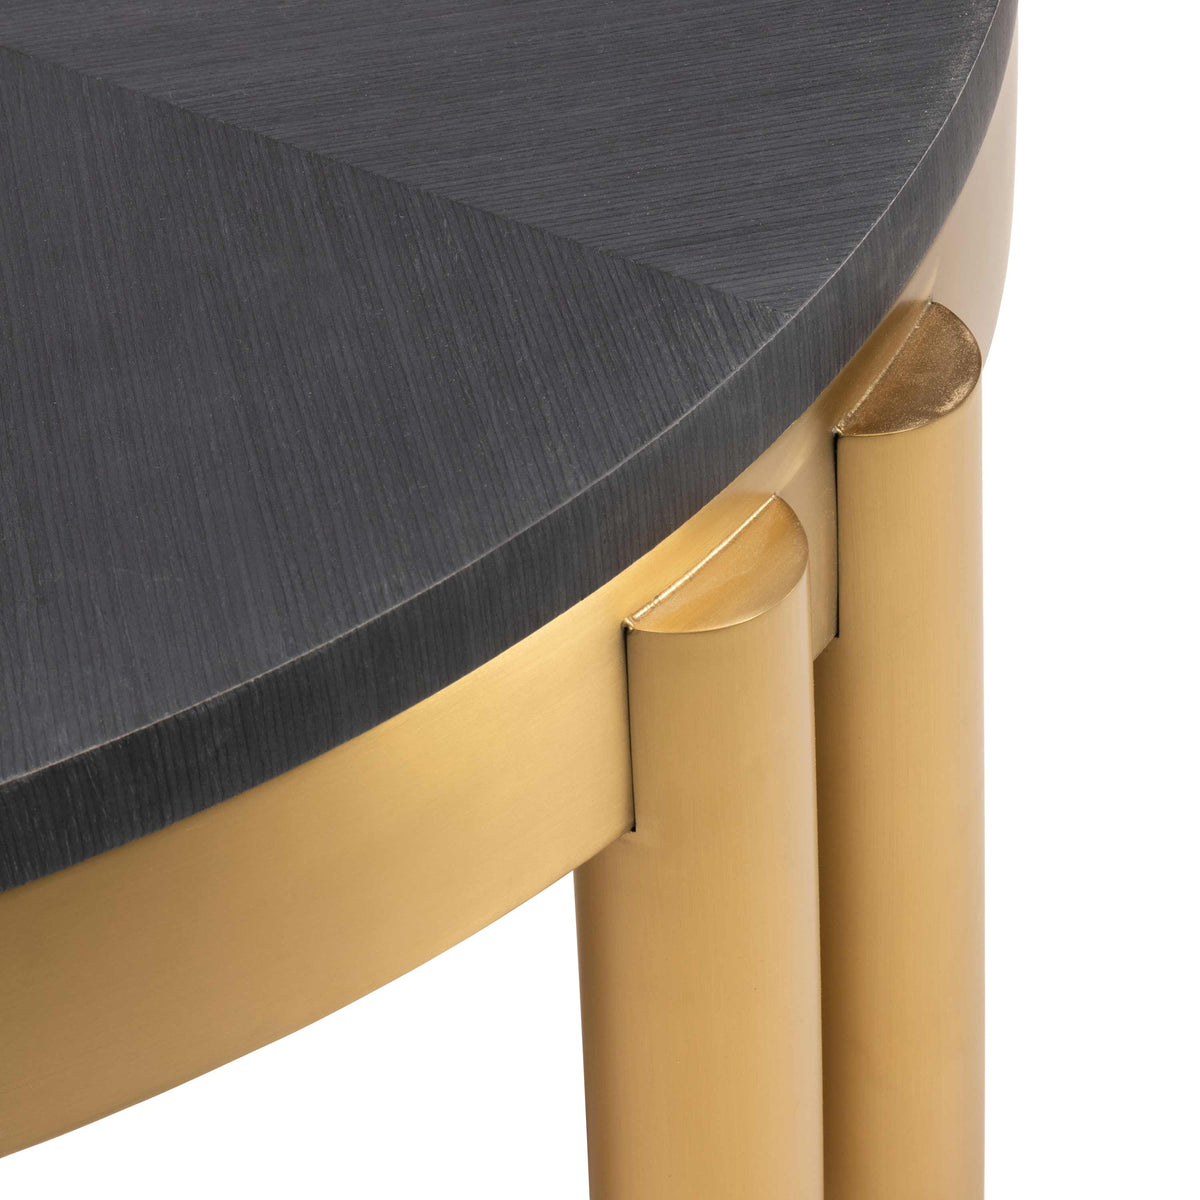 Italia 2 Coffee Table in Black Oak and Brushed Brass